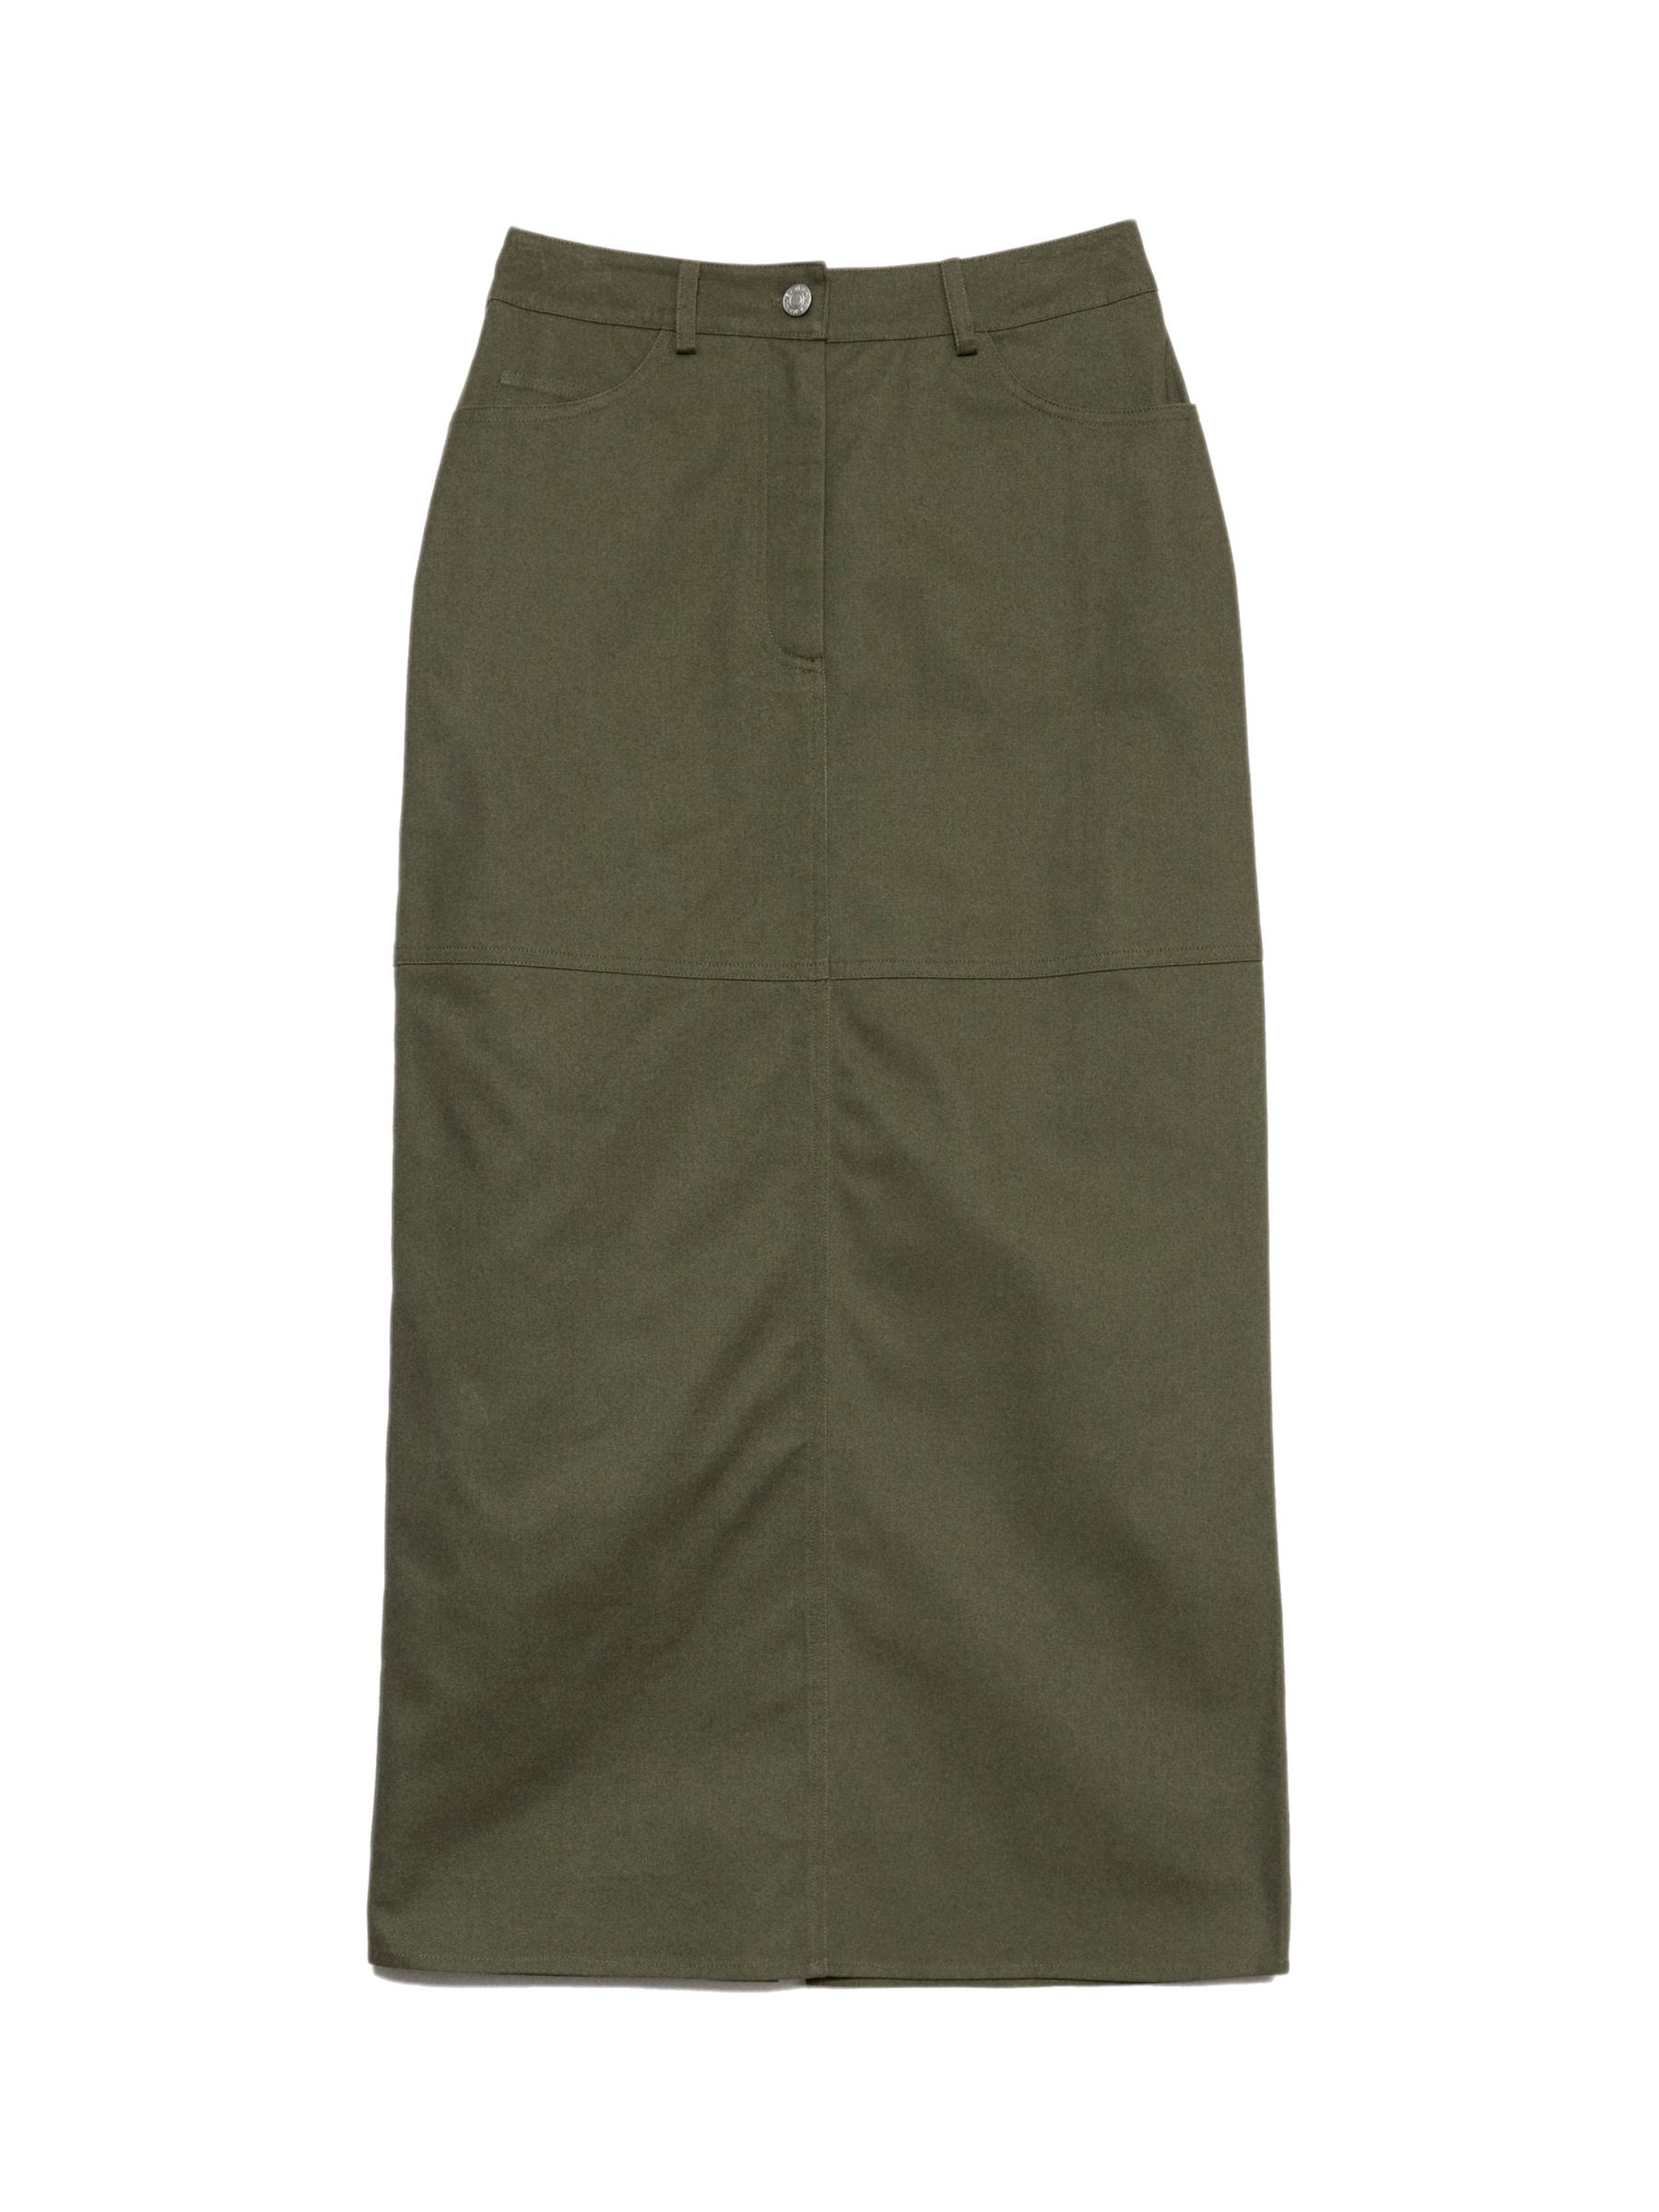 Buy Albaray Cotton Twill Maxi Skirt, Olive Online at johnlewis.com